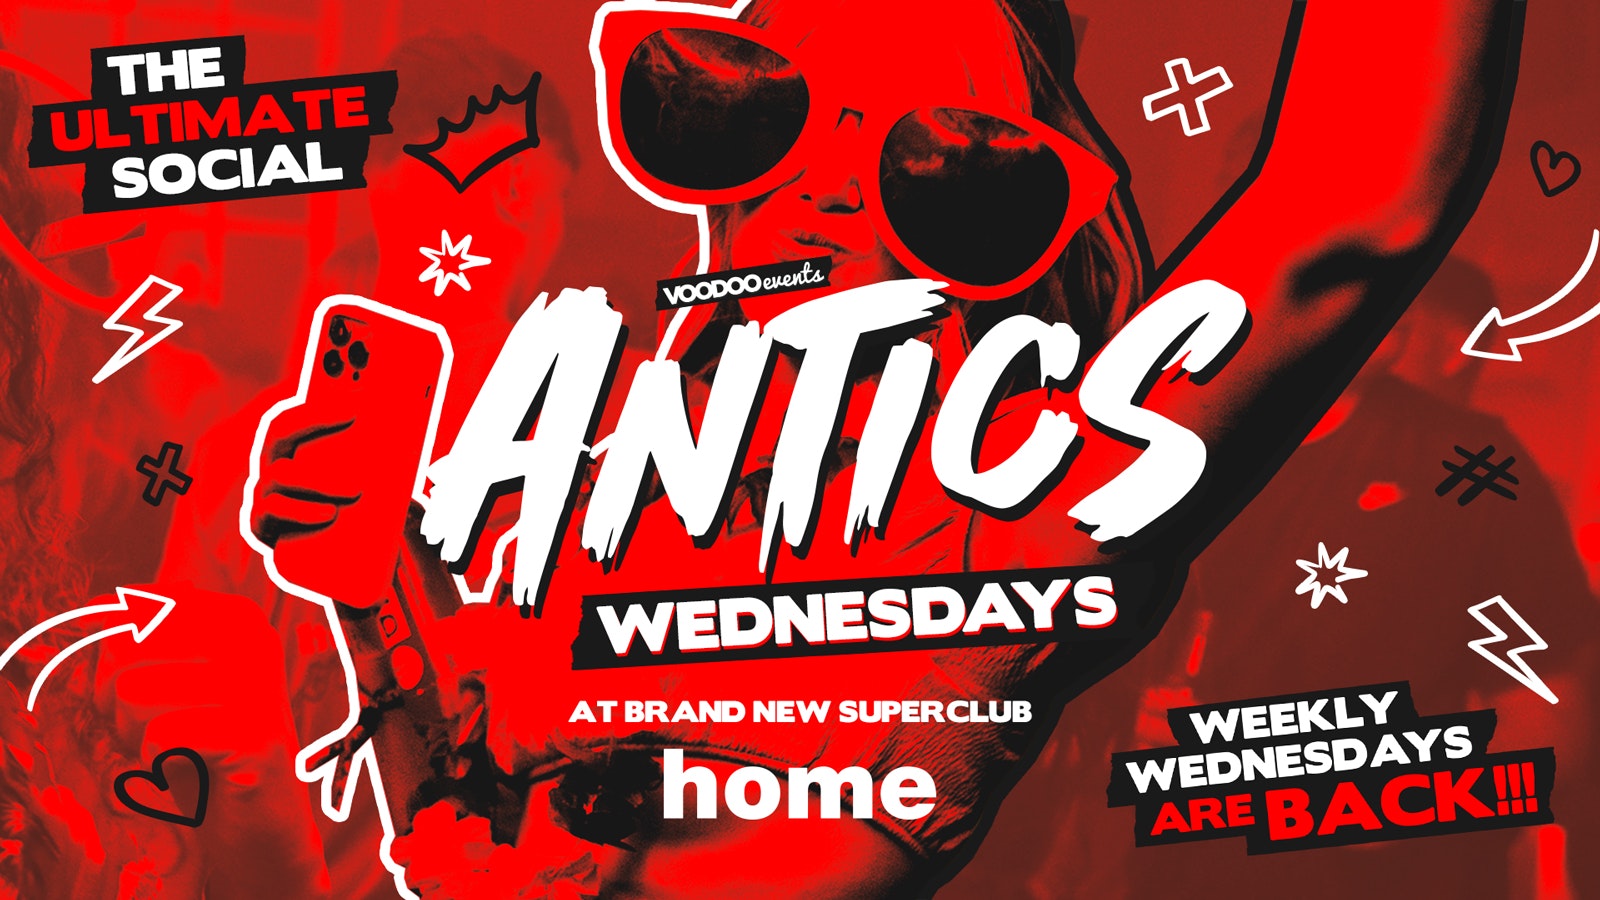 Antics @ THE BRAND NEW SUPER CLUB HOME – Wednesday 22nd May